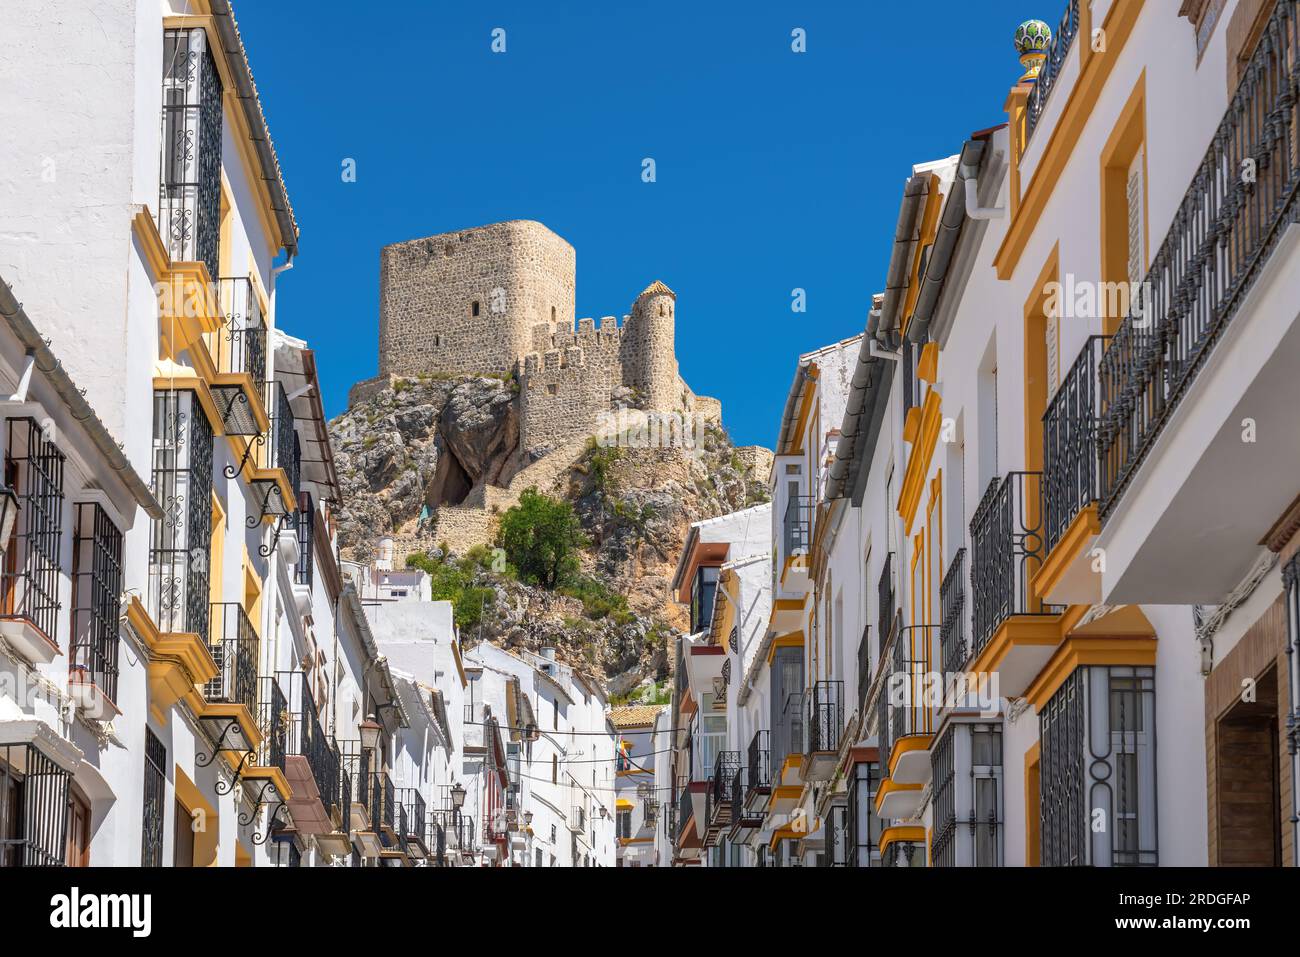 Street with Olvera Castle - Olvera, Andalusia, Spain Stock Photo